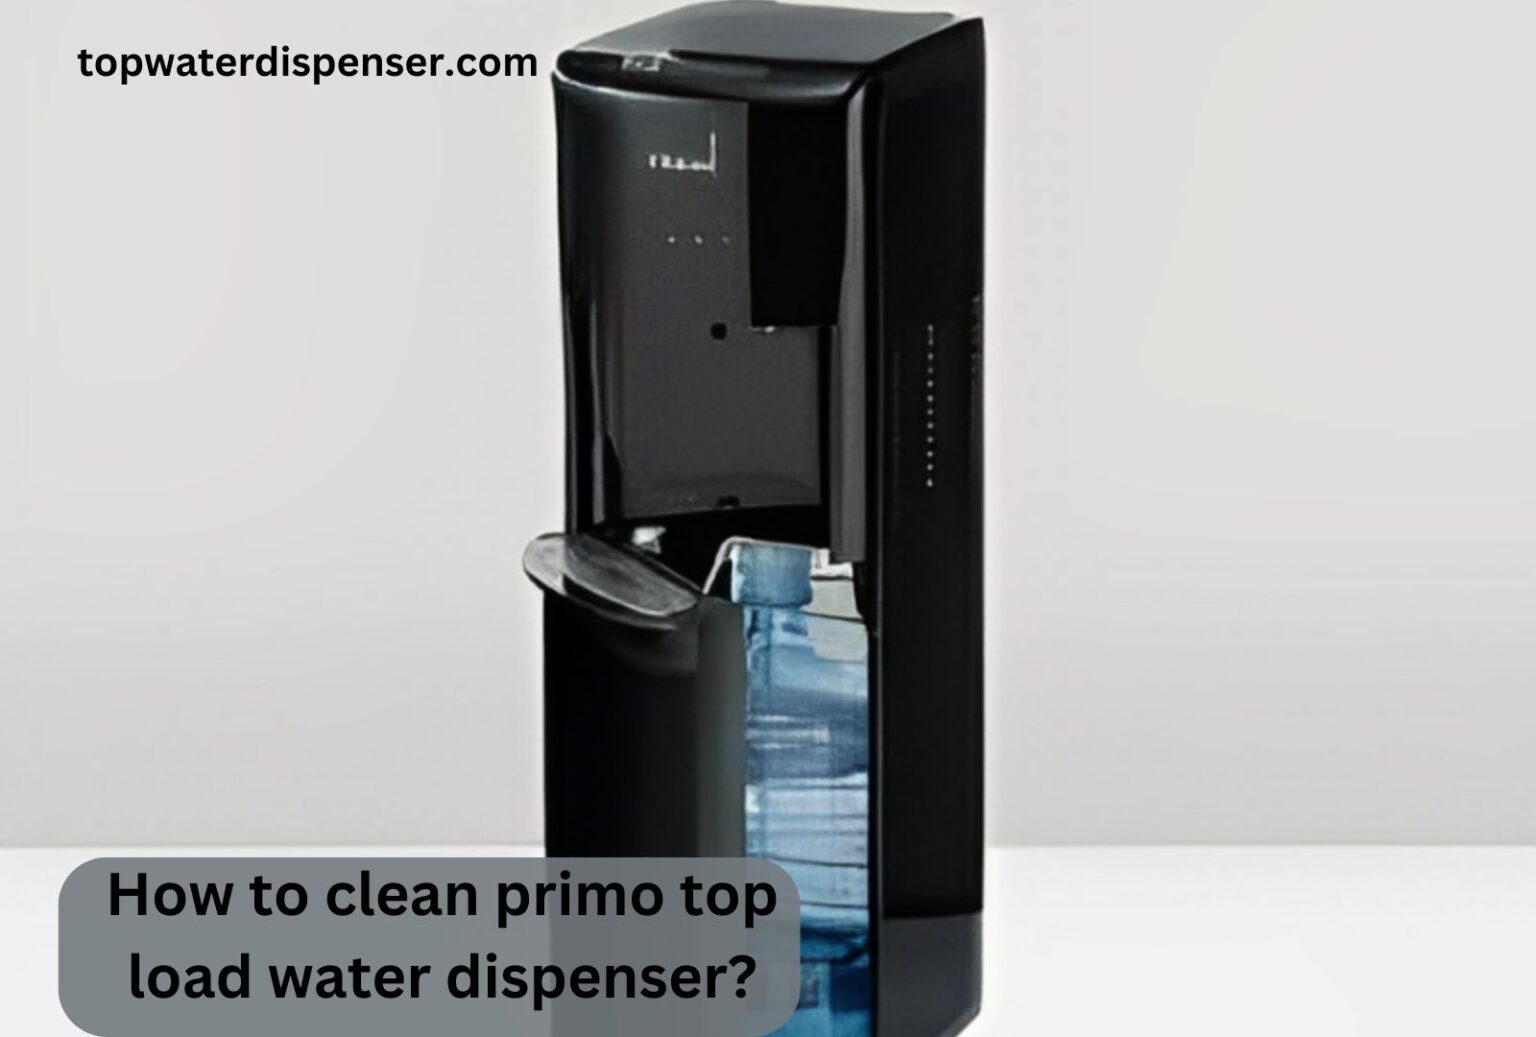 How to clean primo top load water dispenser?